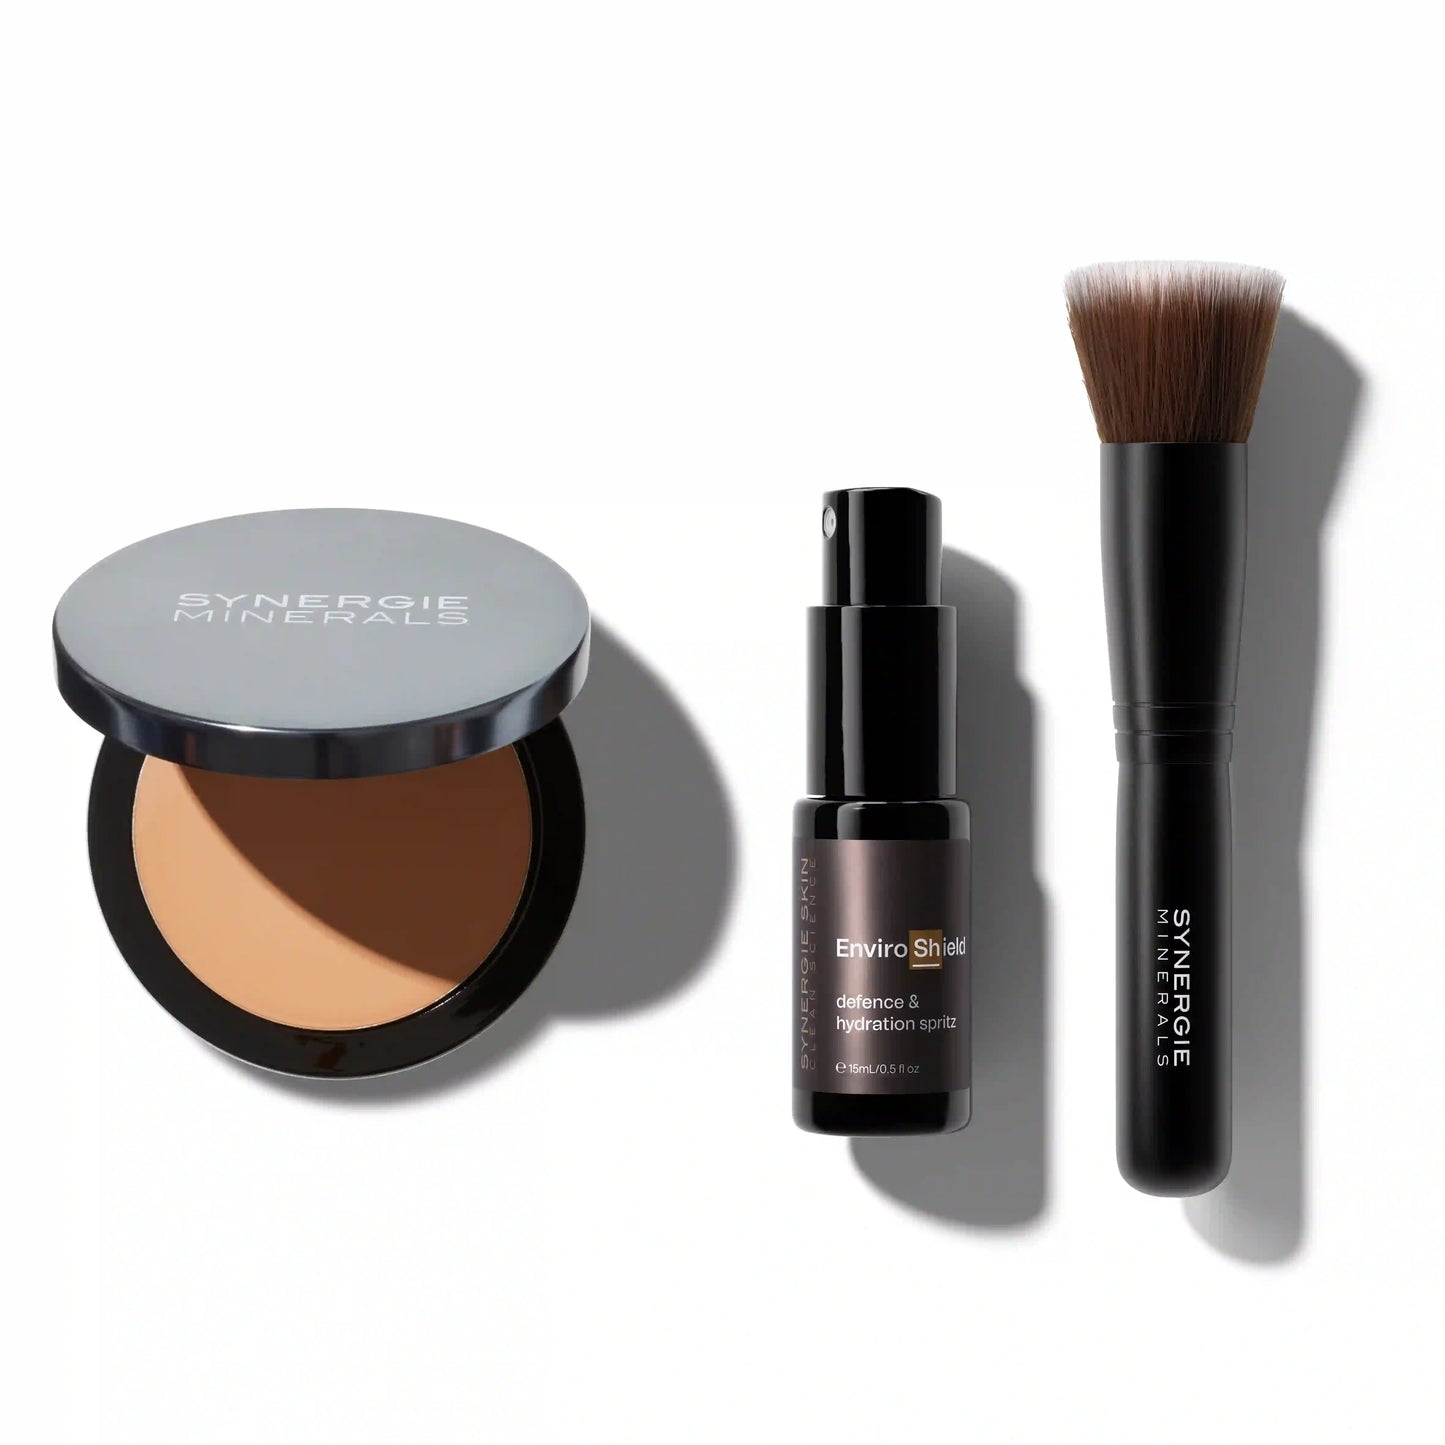 Mineral Protection Kit MW20 - Fair with a peach undertone